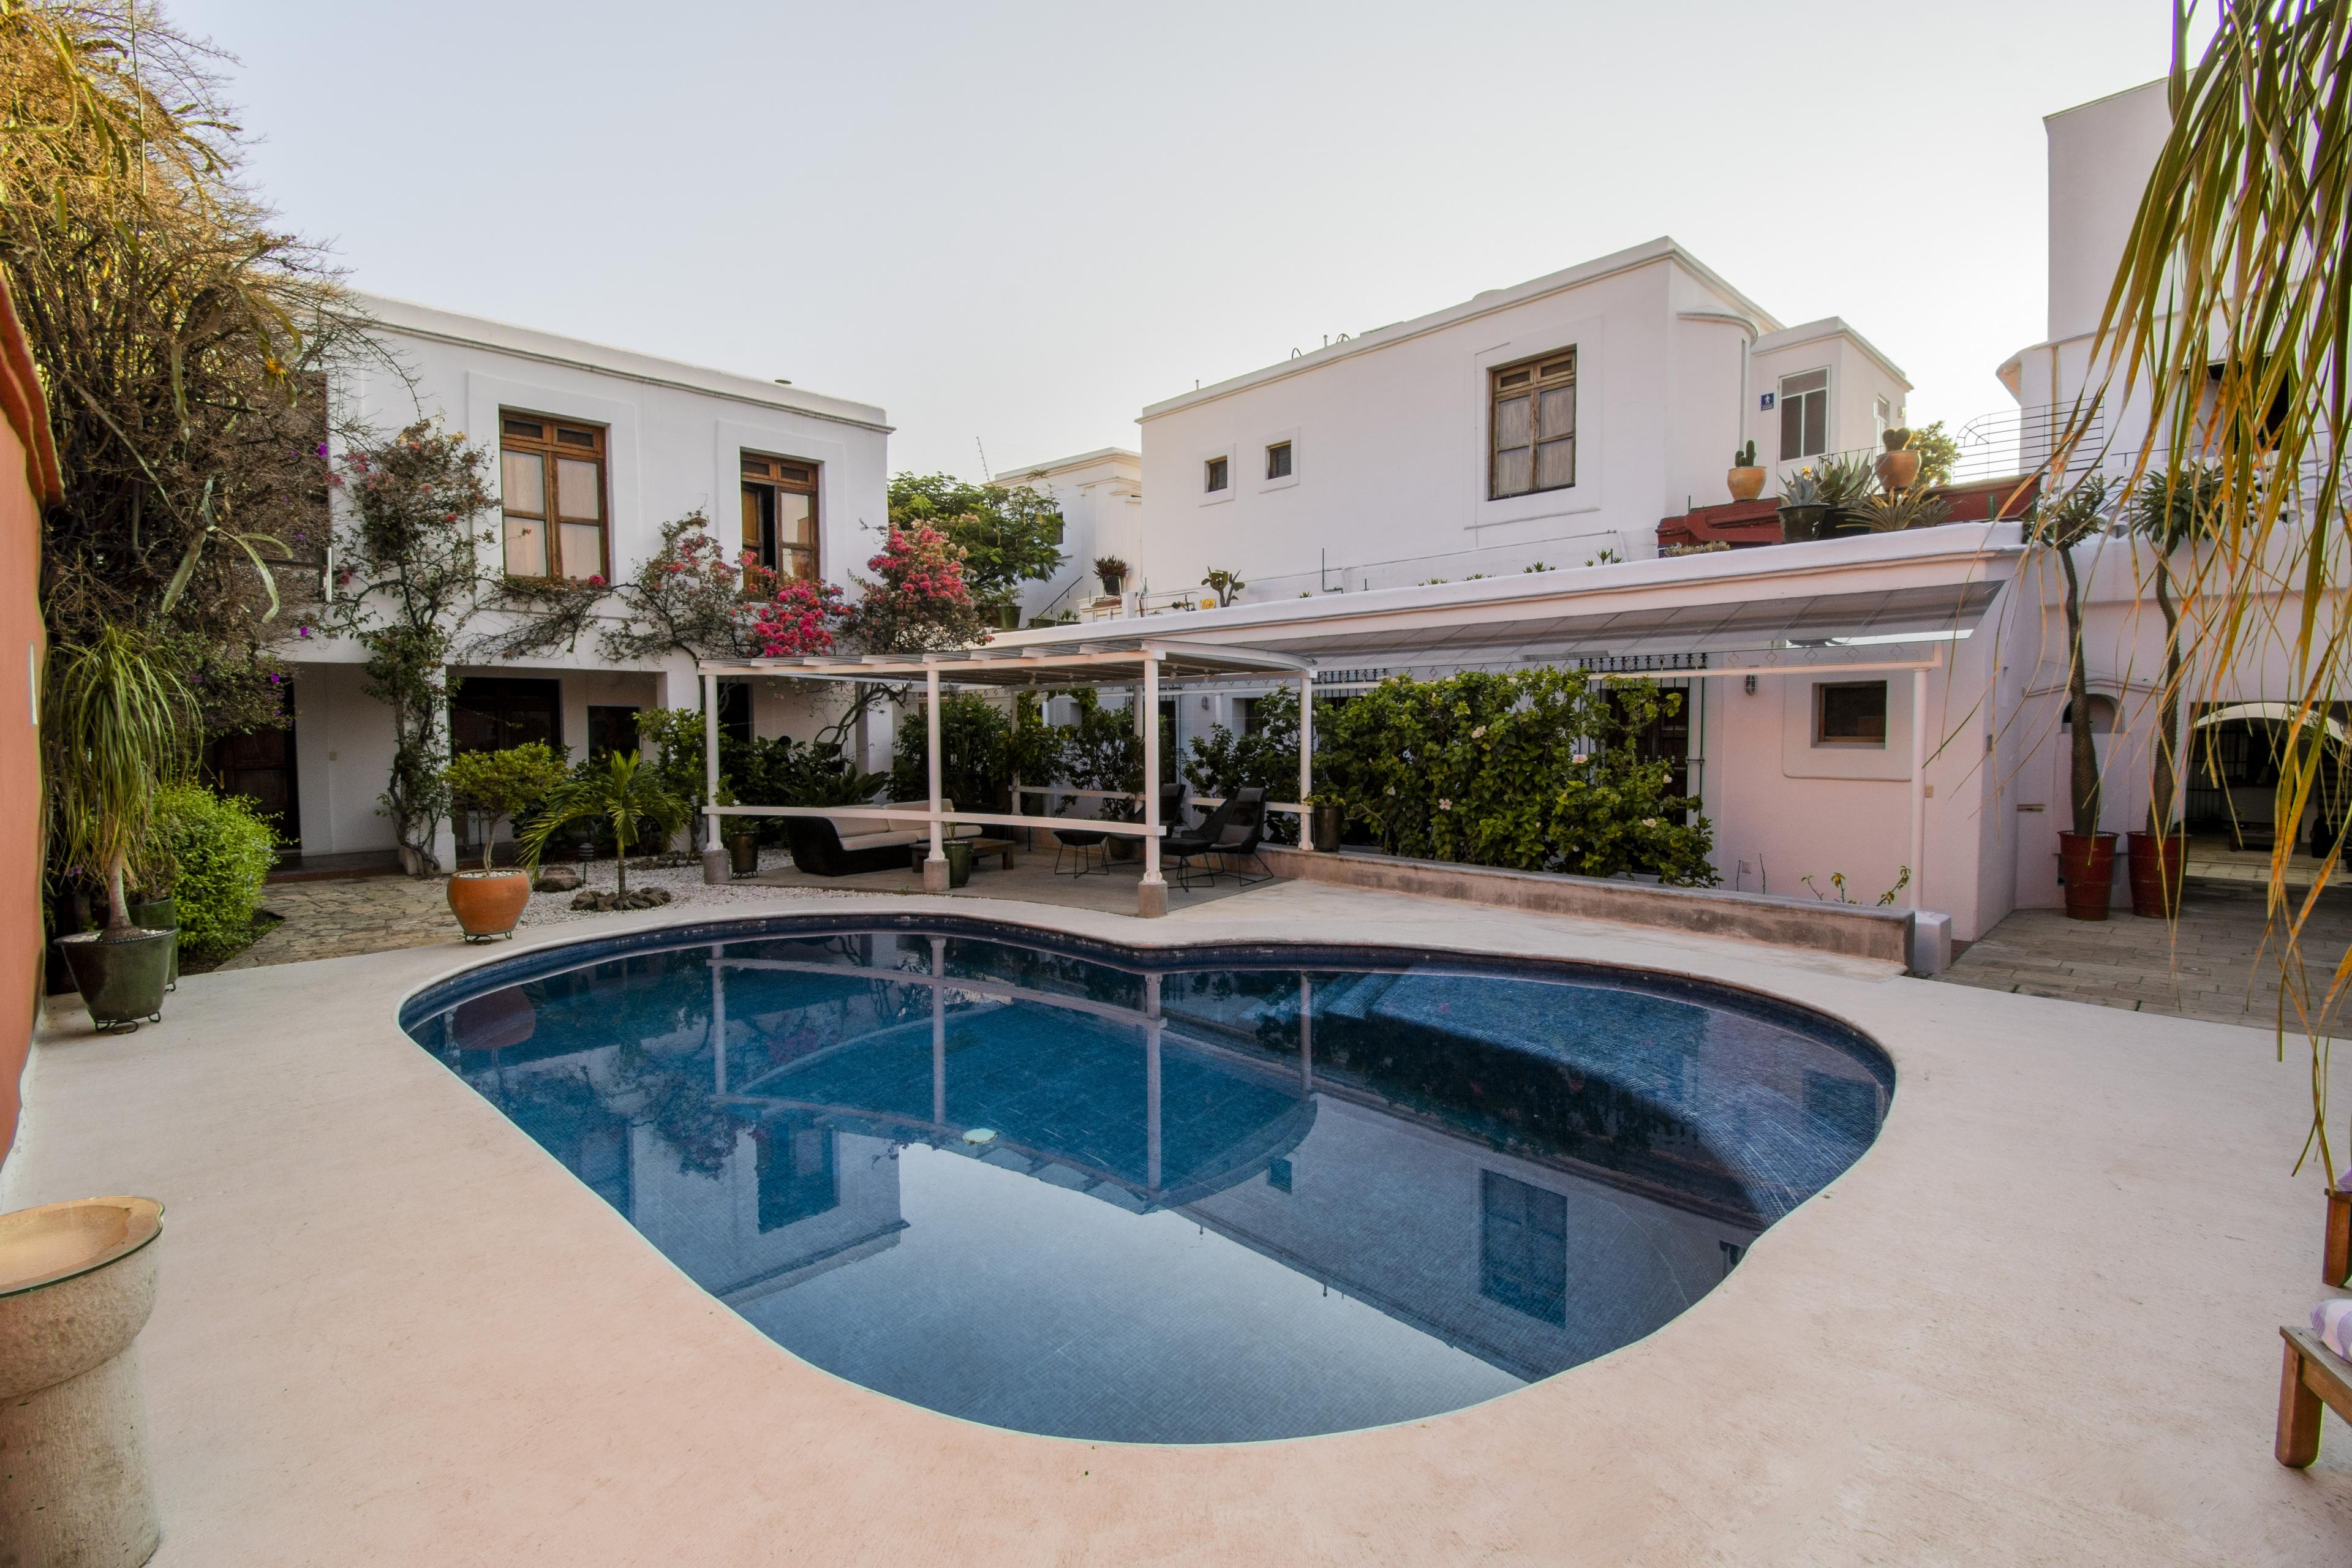 kidney pool in a boutique hotel courtyard